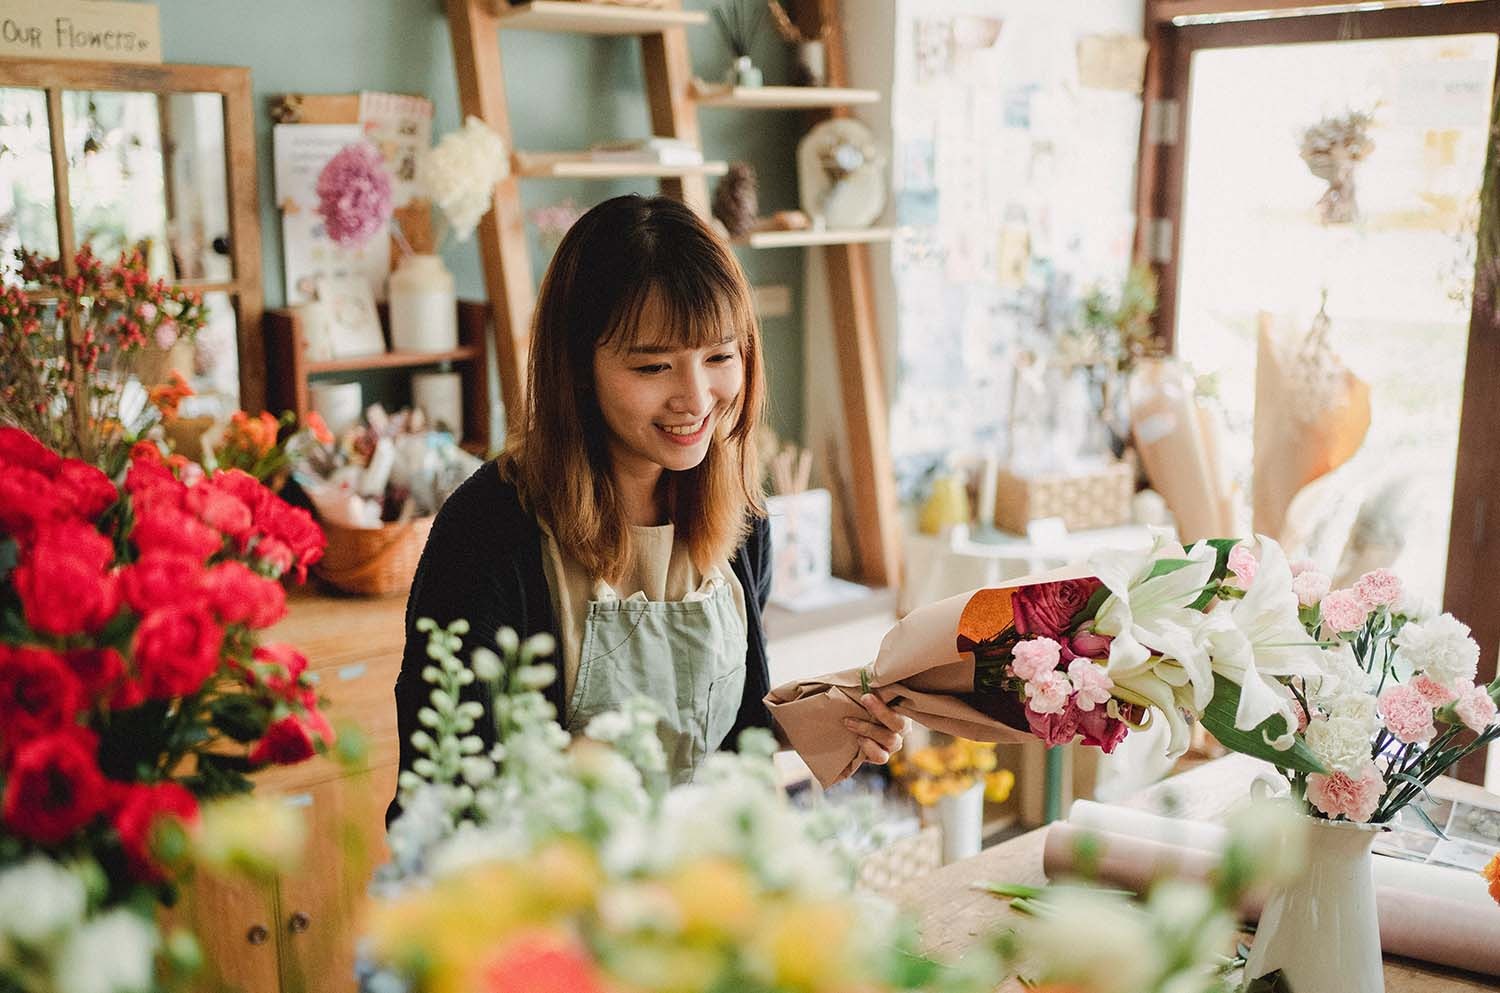 Young Woman Packaging Up Flowers in Her Store